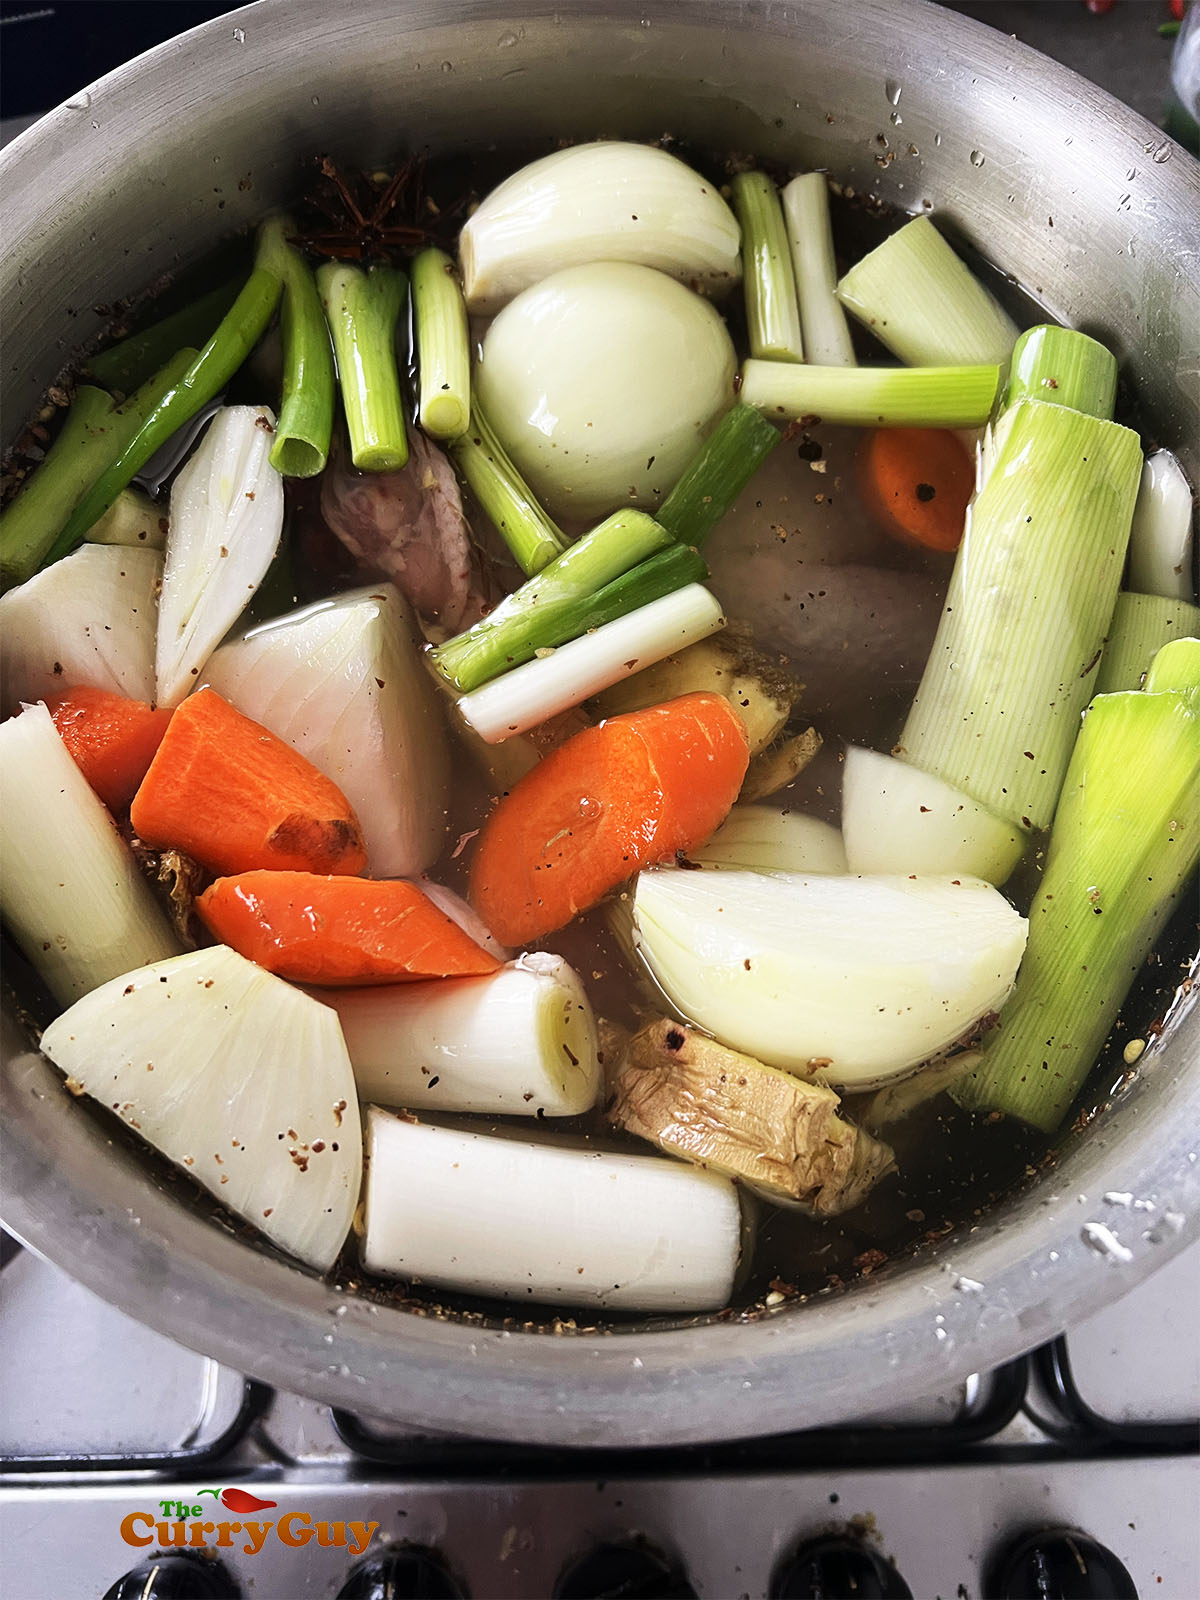 Stock ingredients in a pot.